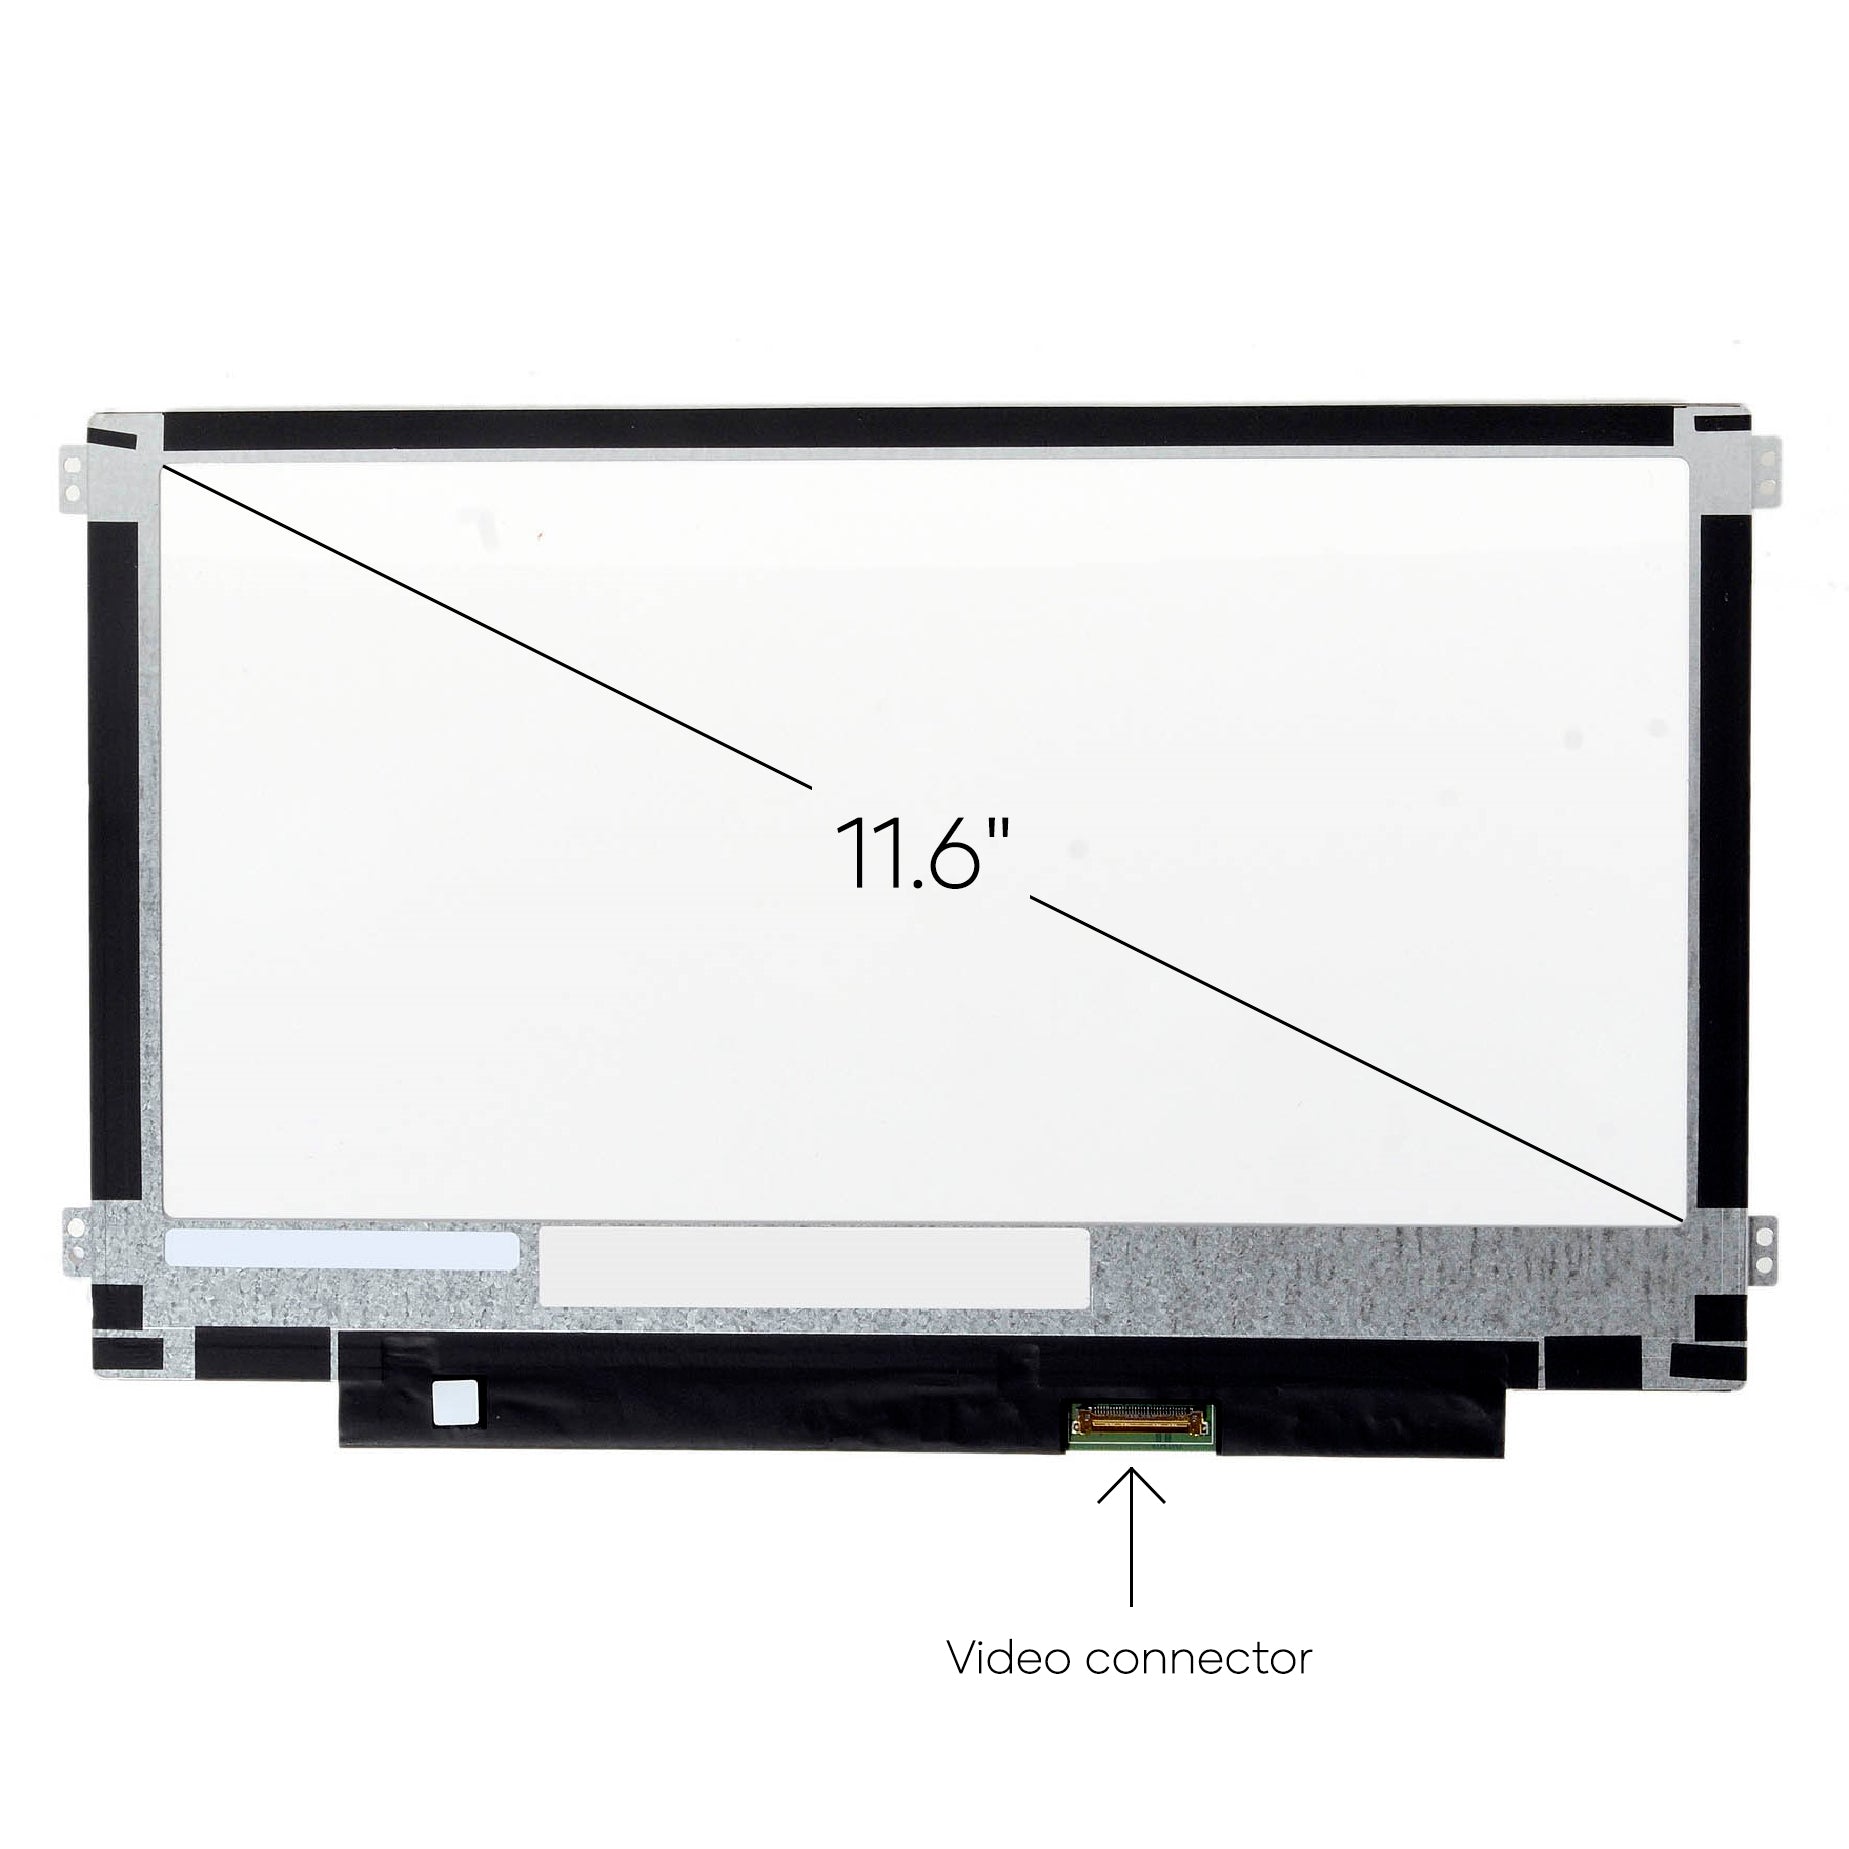 Screen Replacement for Acer Aspire One Cloudbook AO1-131-C0A6 HD 1366x768 Matte LCD LED Display